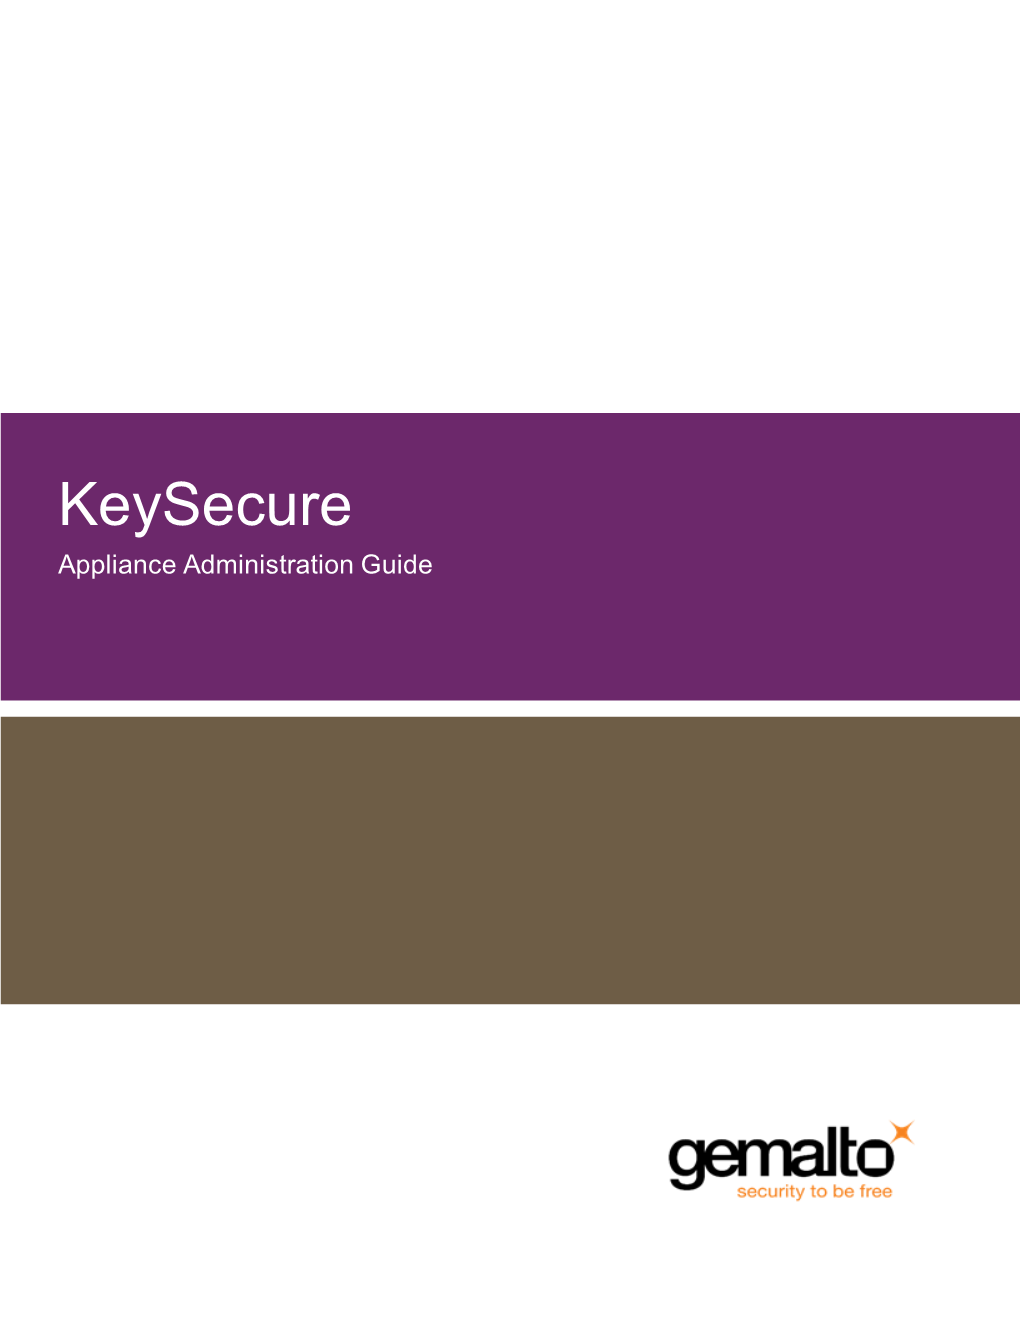 Keysecure Appliance Administration Guide Document Information